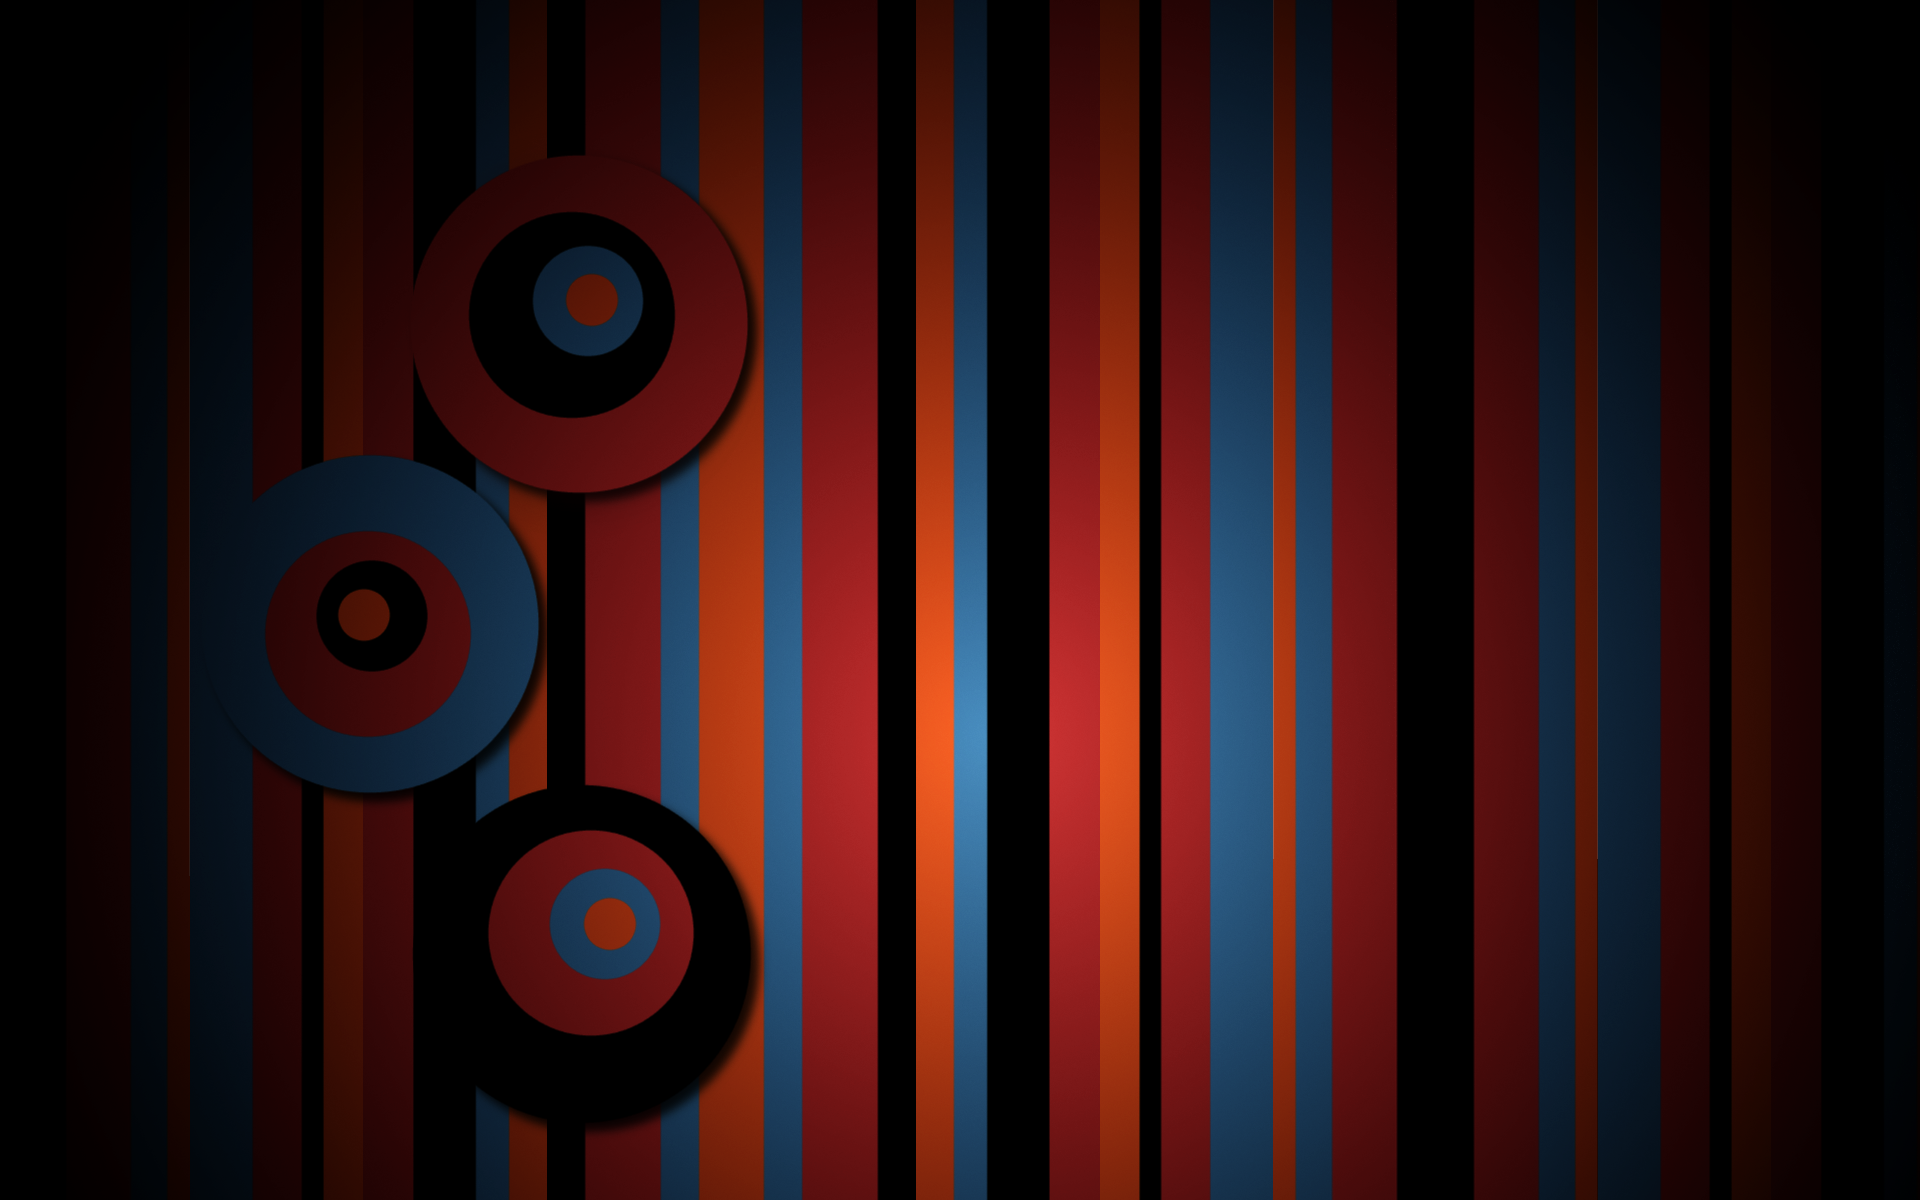 Stripes Circle Abstract texture pattern wallpaper 1920x1200 50495